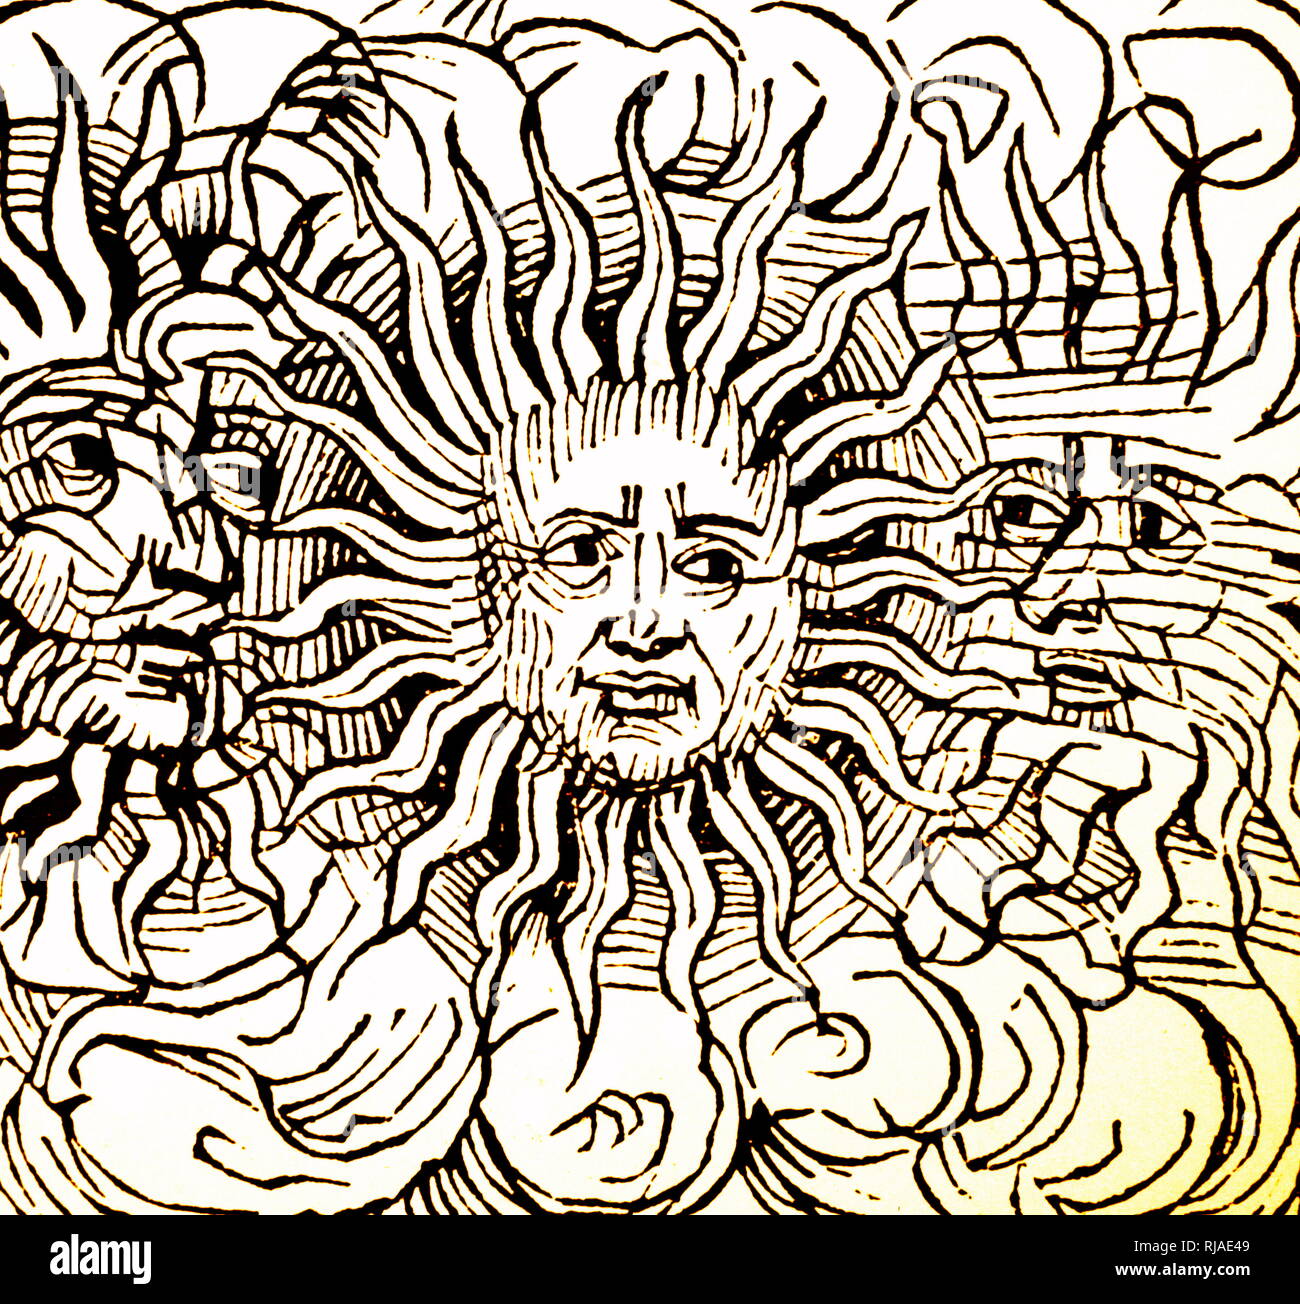 Illustration showing Sun dog phenomenon depicted in the Nuremberg Chronicle. 1493. This version was associated with the death of Julius Caesar in 44 BC. A sun dog (or sundog) or mock sun, formally called a parhelion, (plural Parhelia) in meteorology, is an atmospheric optical phenomenon that consists of a bright spot to the left or right of the Sun. Aristotle notes that 'two mock suns rose with the sun and followed it all through the day until sunset.' Stock Photo